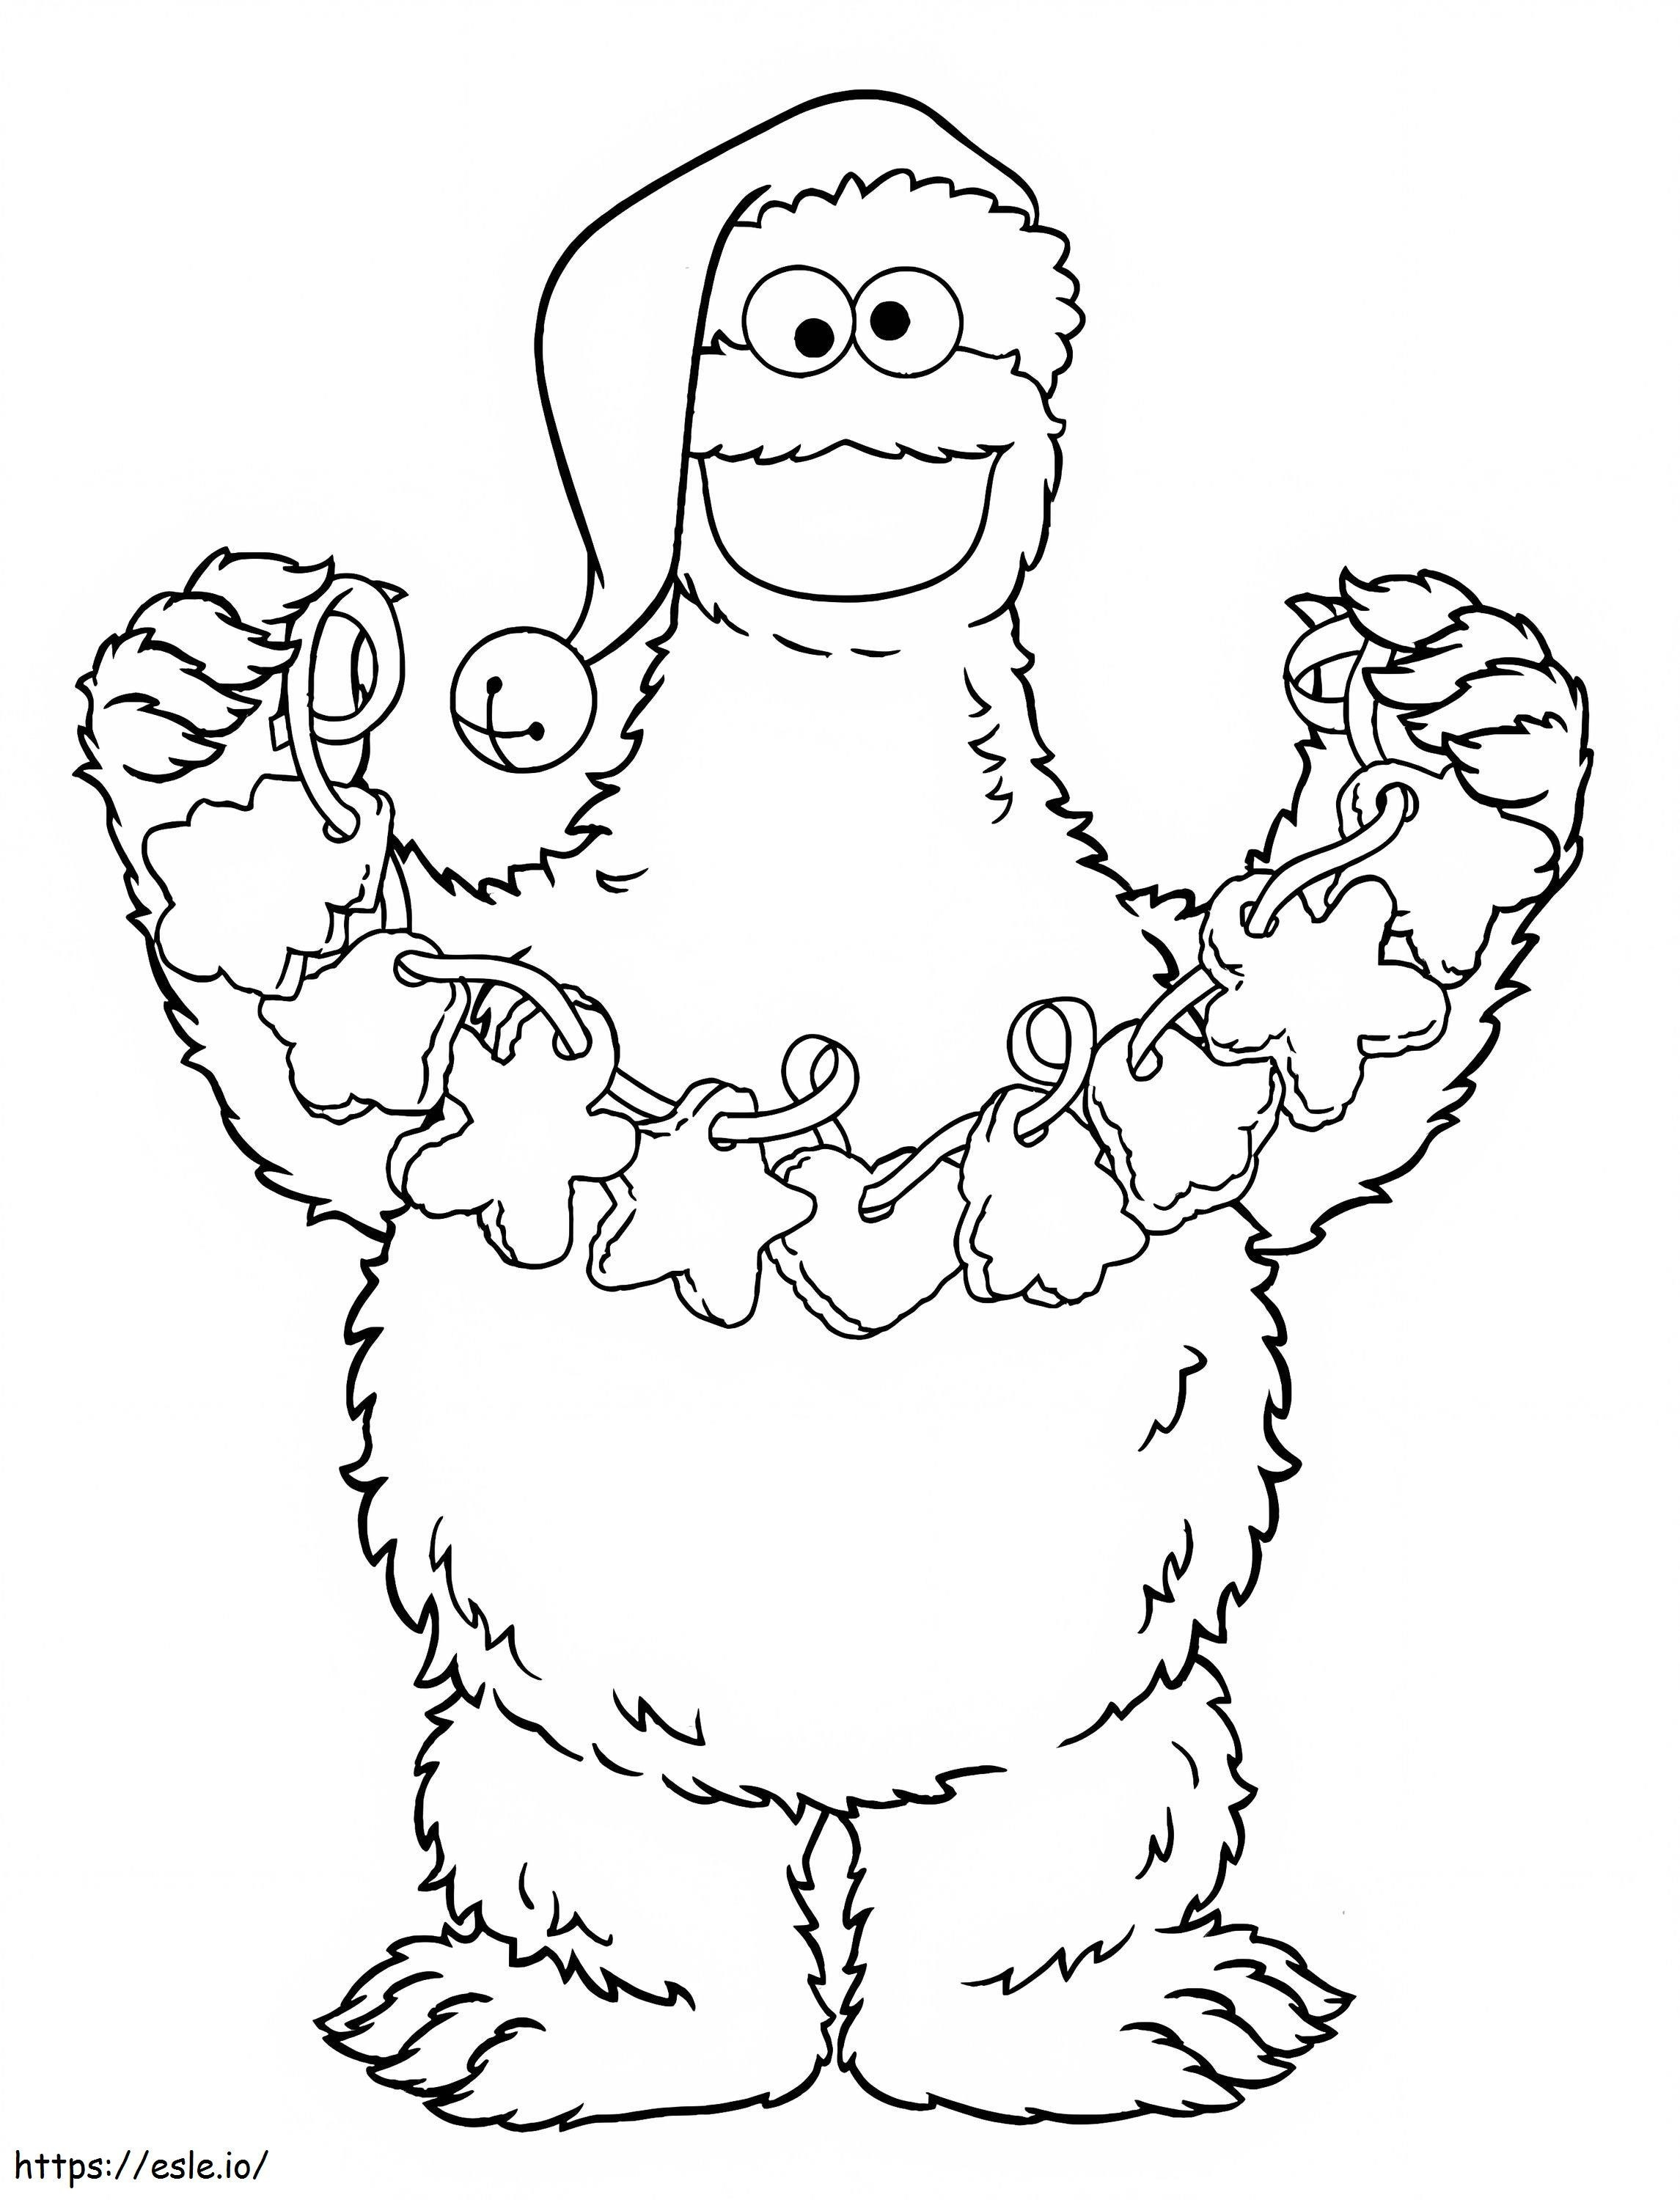 Christmas Cookie Monster coloring page